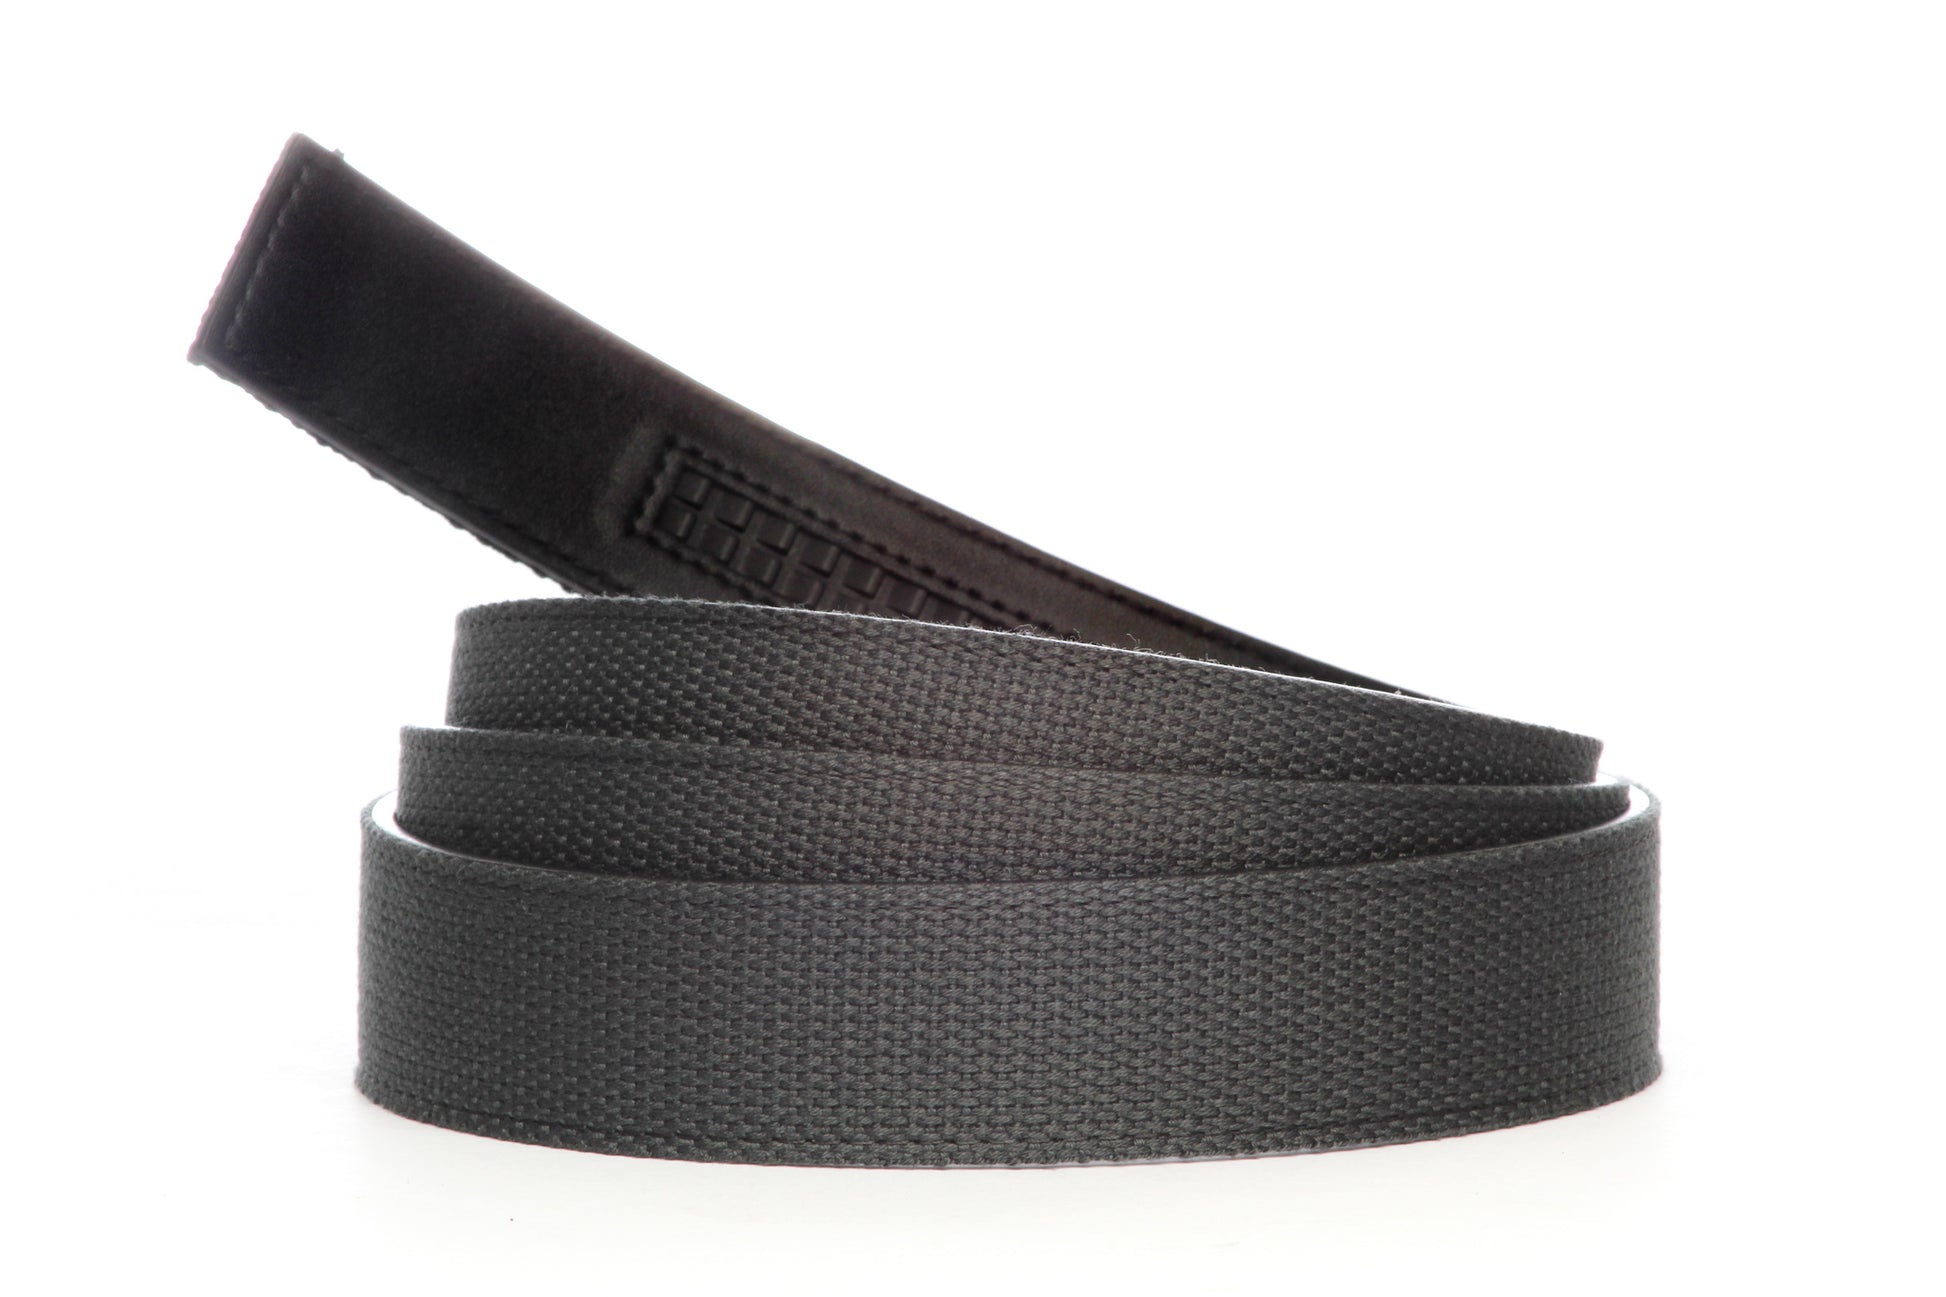 Men's canvas belt strap in graphite with a 1.25-inch width, casual look, microfiber back